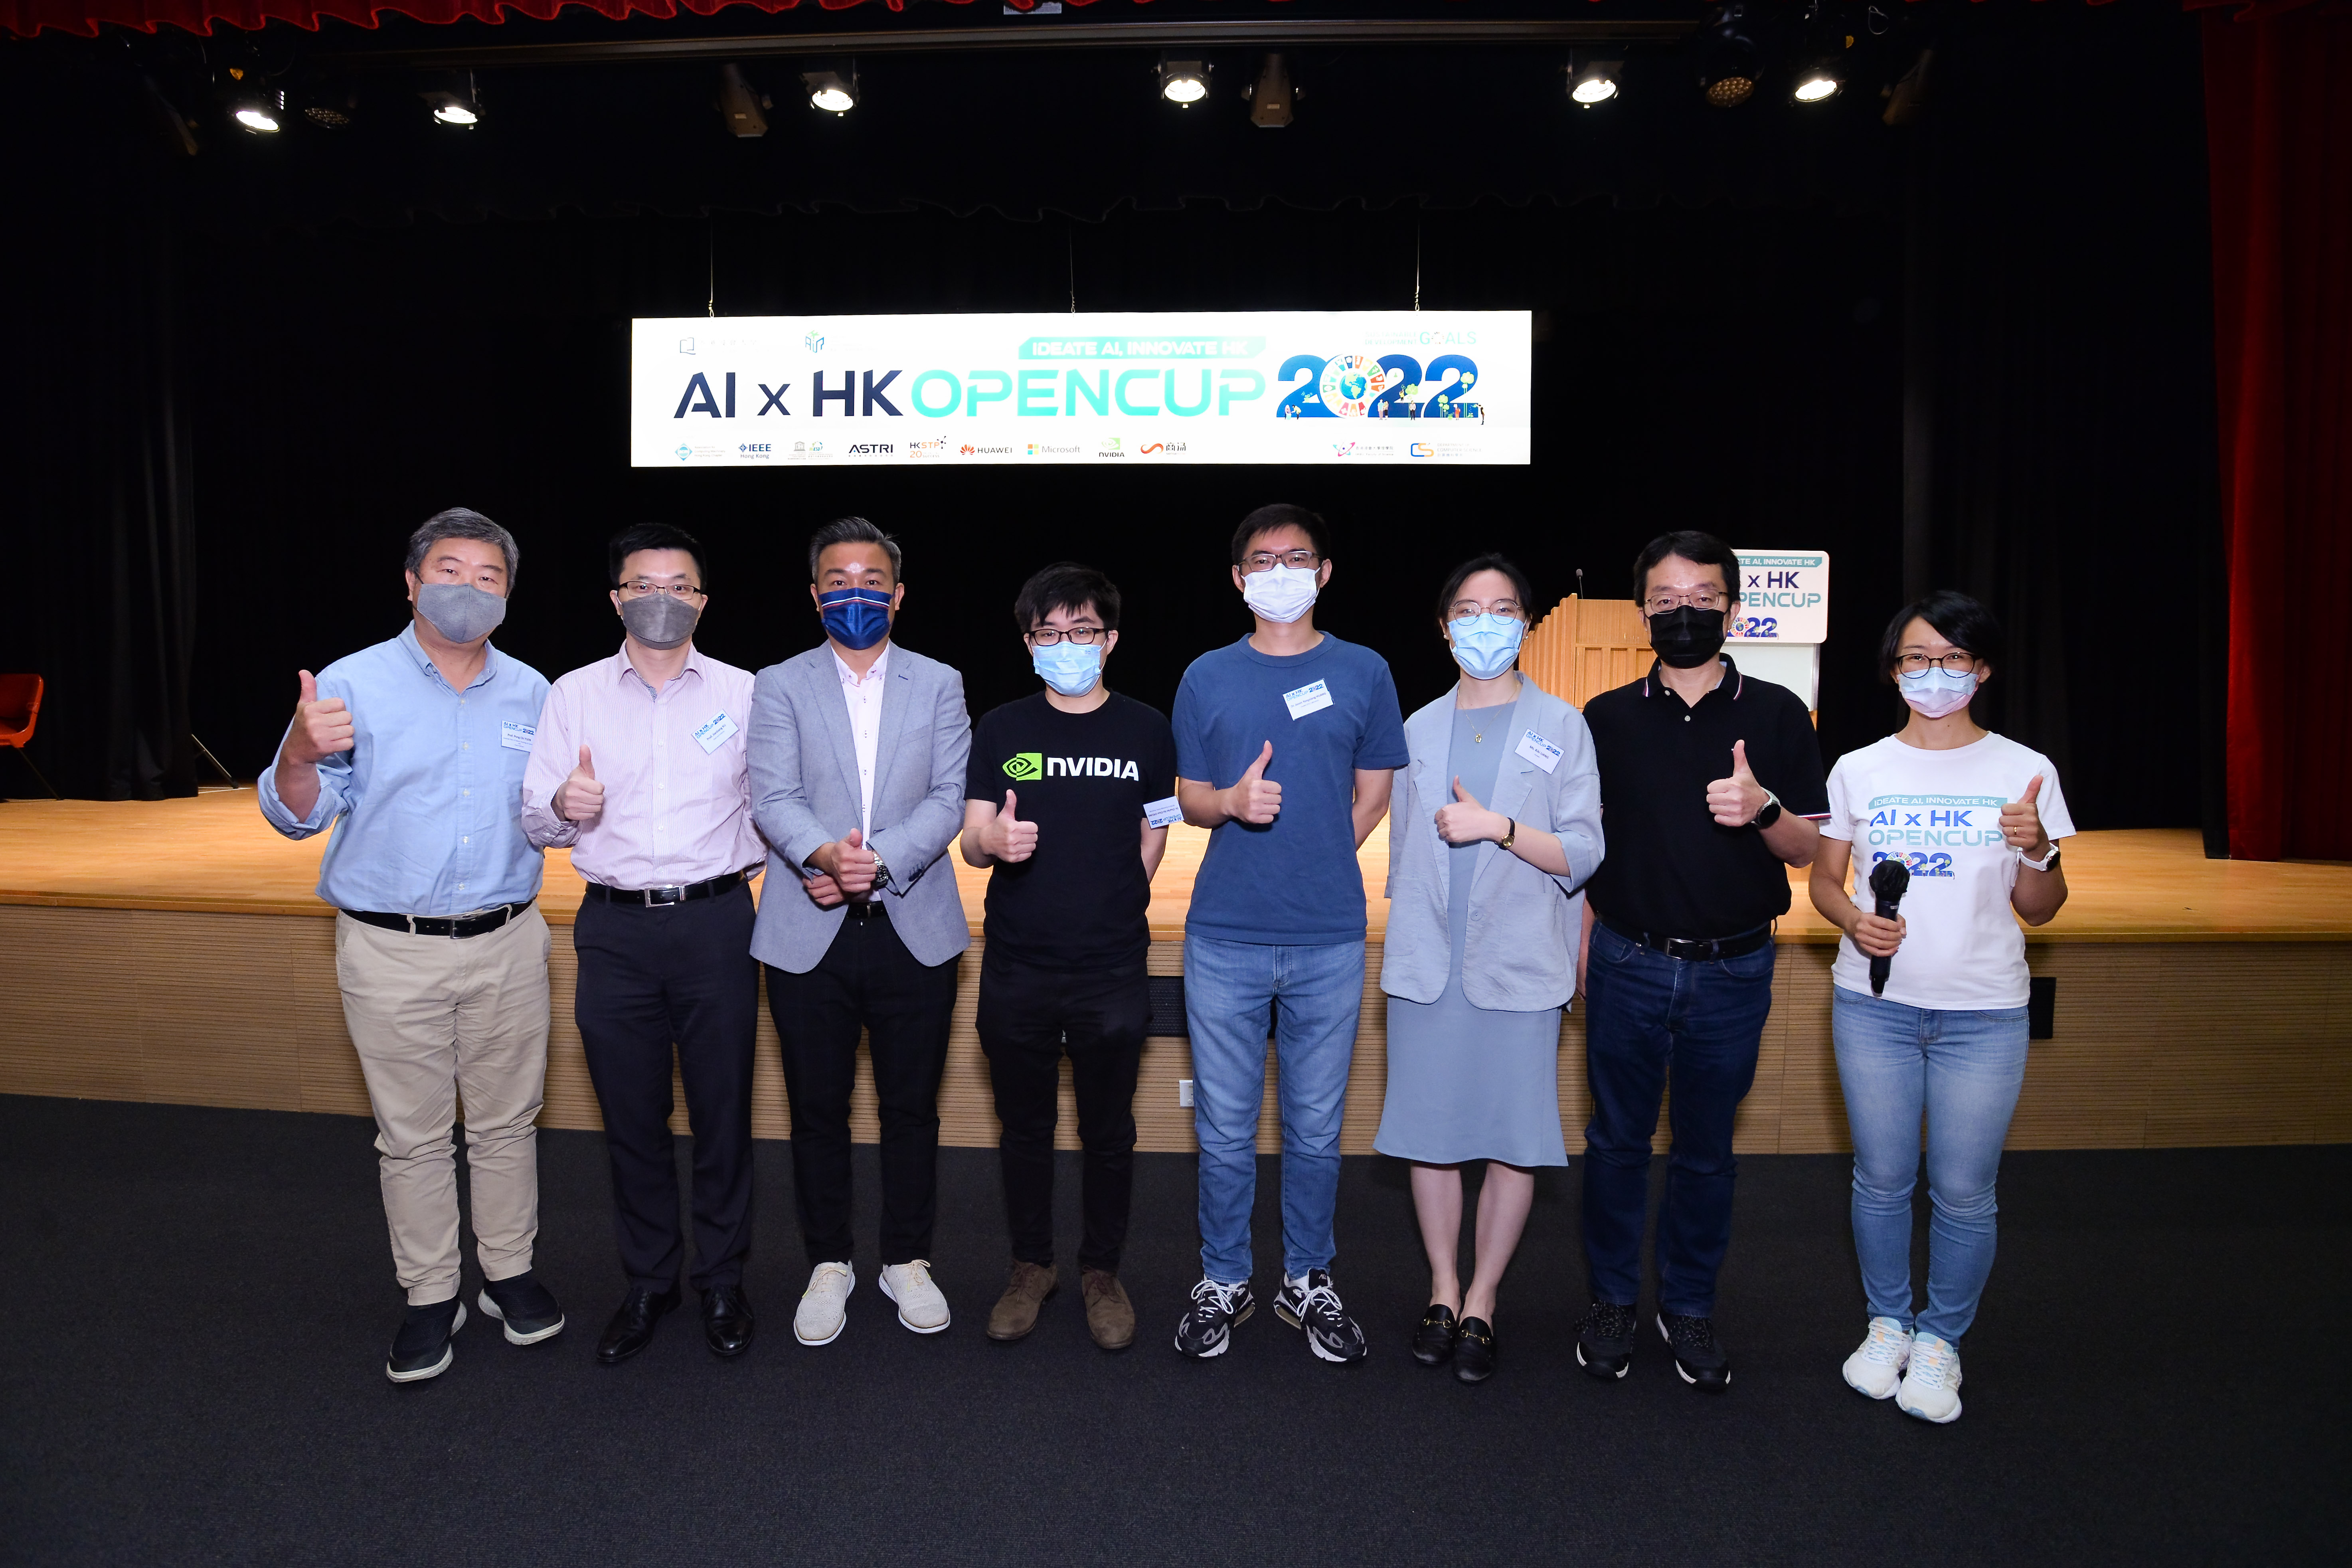 The Organising Committee of the “AI x HK OpenCup 2022” welcomes the keynote speakers, including Mr Andy Fung, Lead of the SDG Campus of the Hong Kong Institute of Education for Sustainable Development (third left); Dr Charles Cheung, Deputy Director of the NVIDIA AI Technology Centre, Hong Kong (fourth left); and Dr Jason Huang, Senior Researcher of the Hong Kong Research Centre, Huawei (fifth left).  